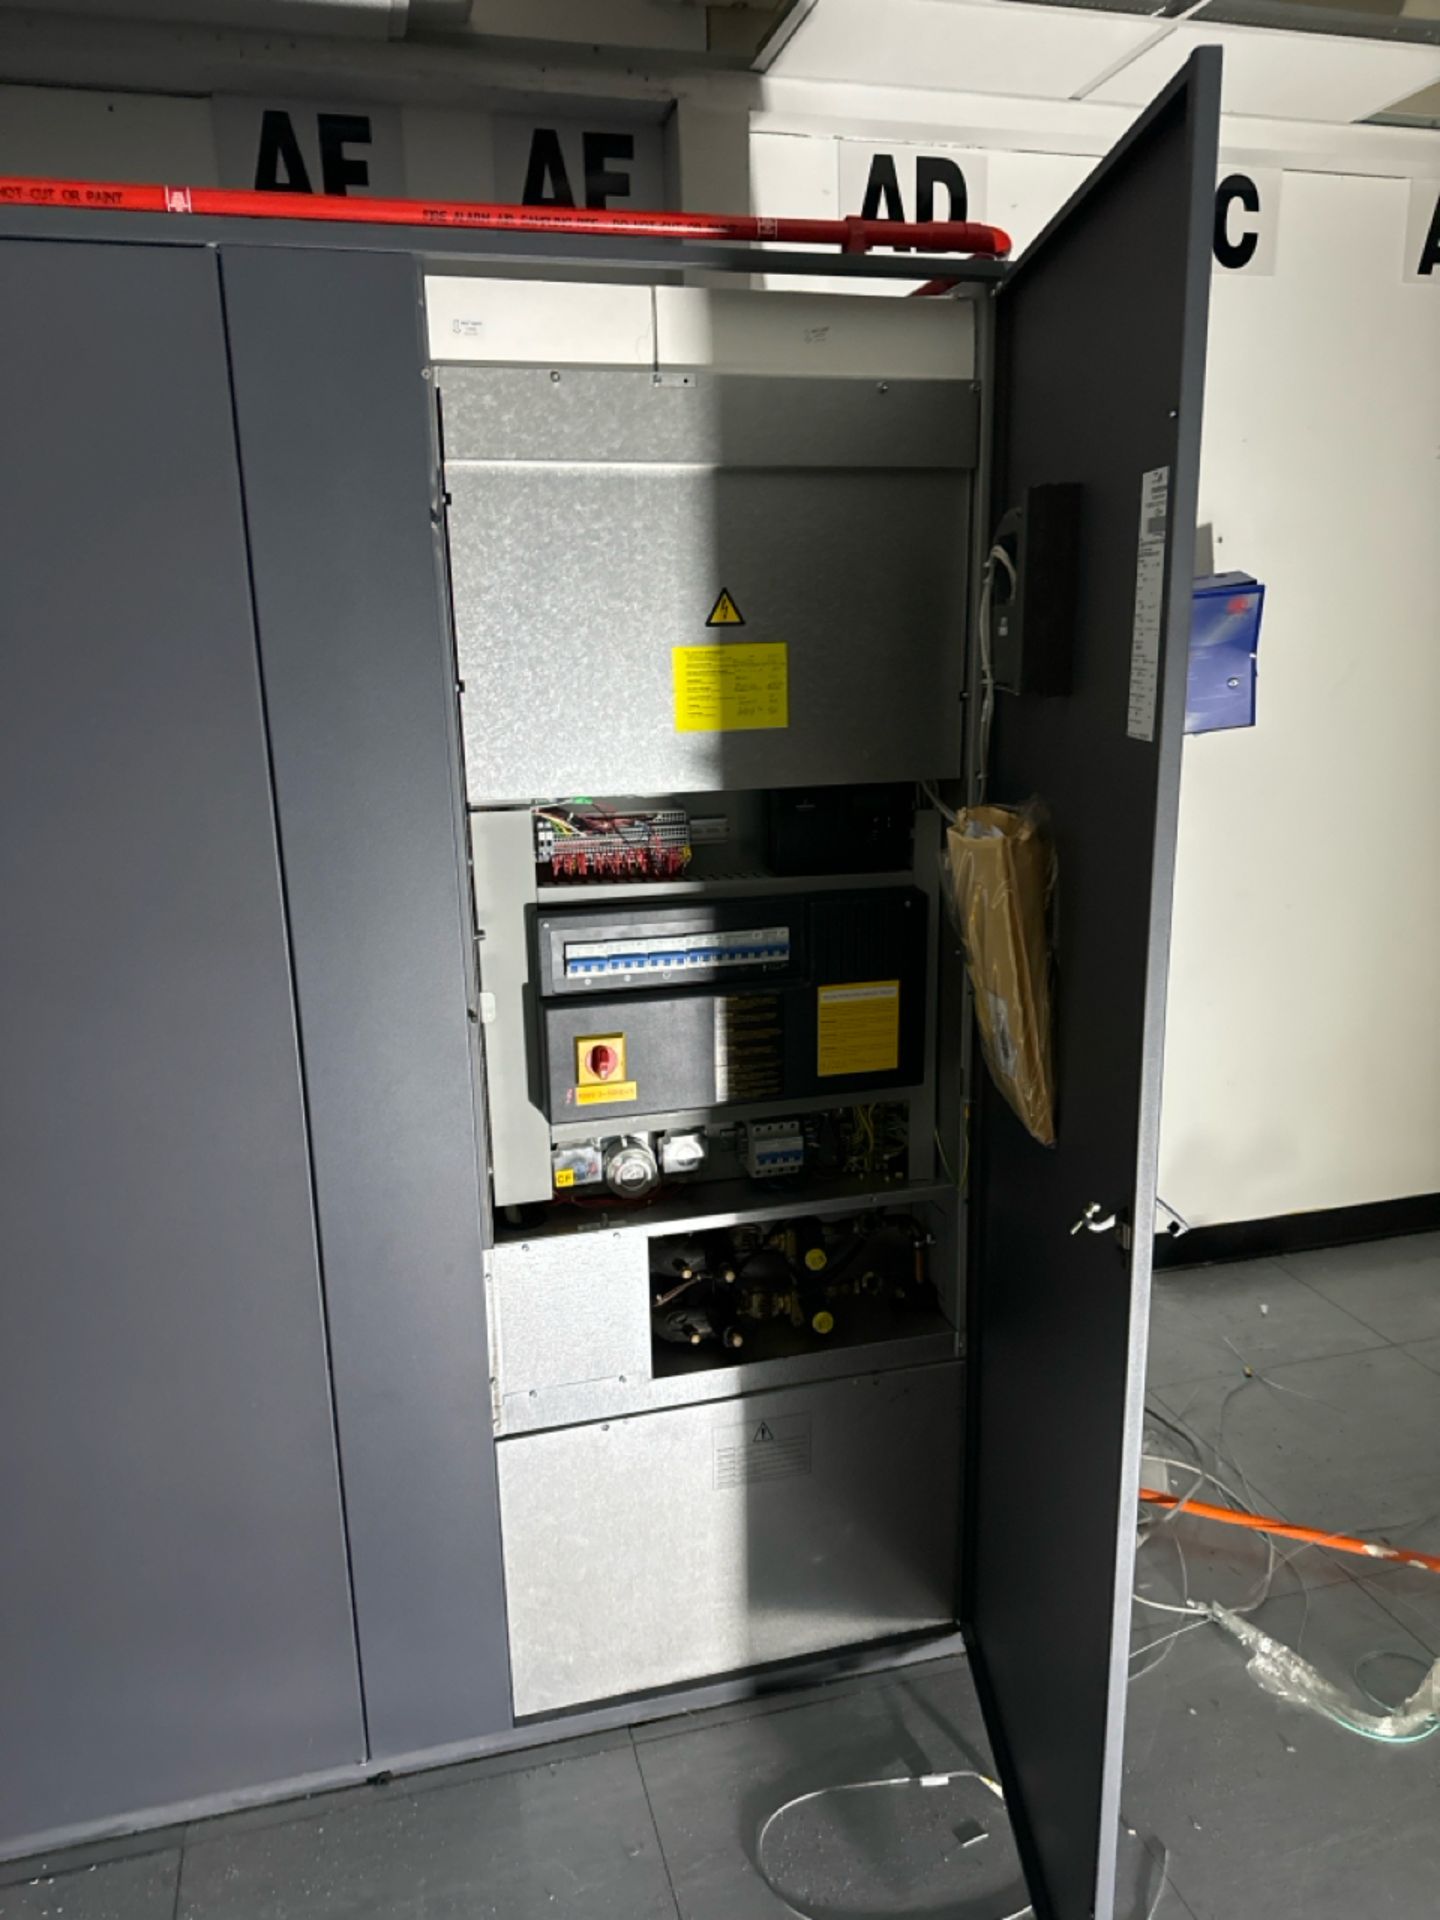 Emerson Network Power - Image 4 of 5